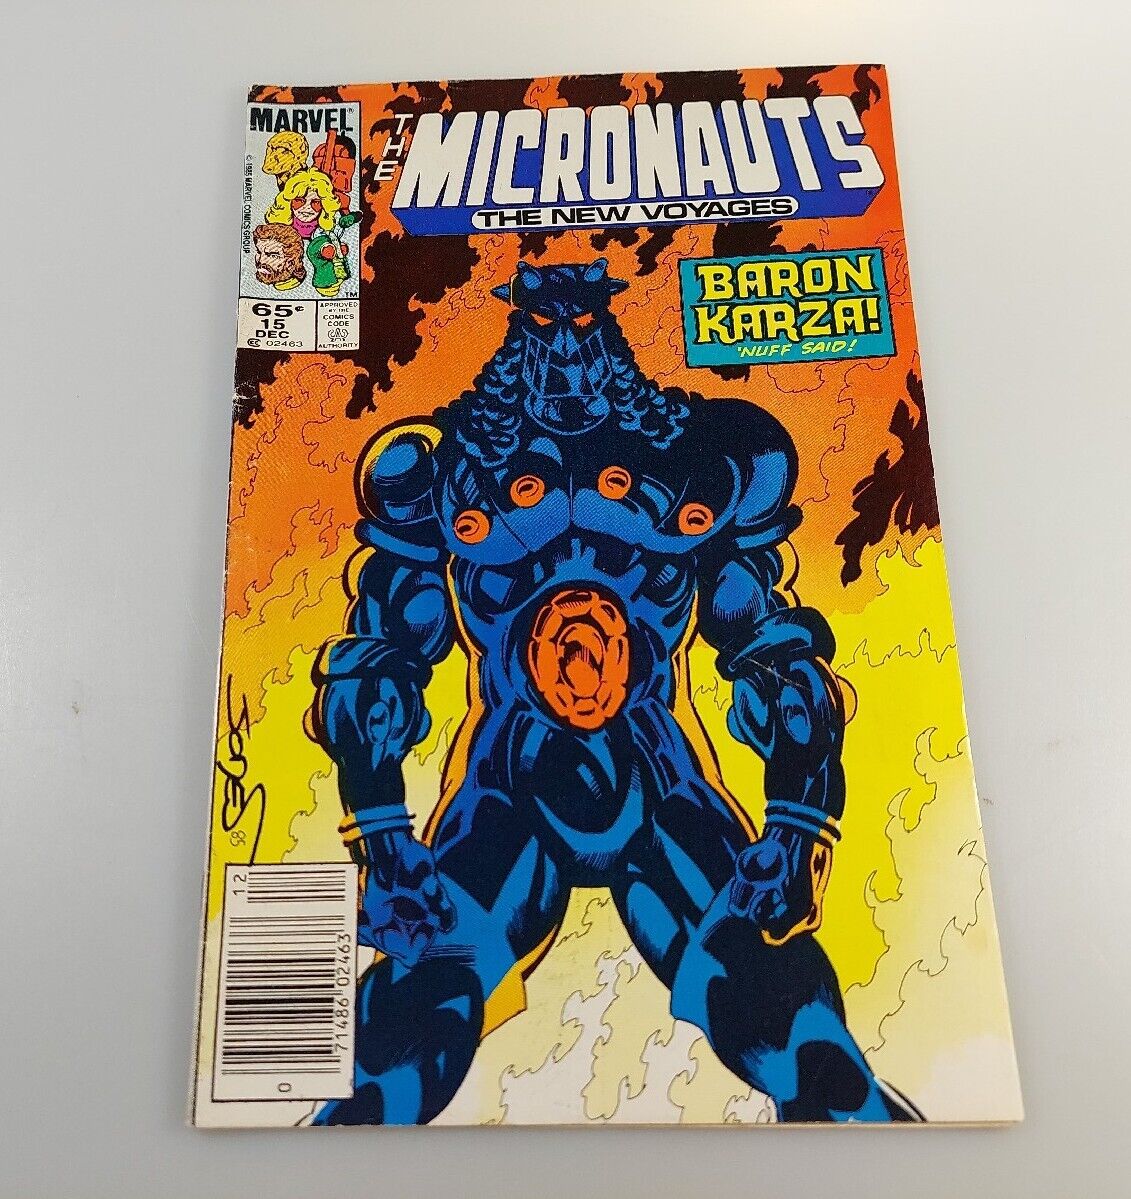 Micronauts (Vol. 2) #15 (Newsstand) Marvel | the New Voyages 